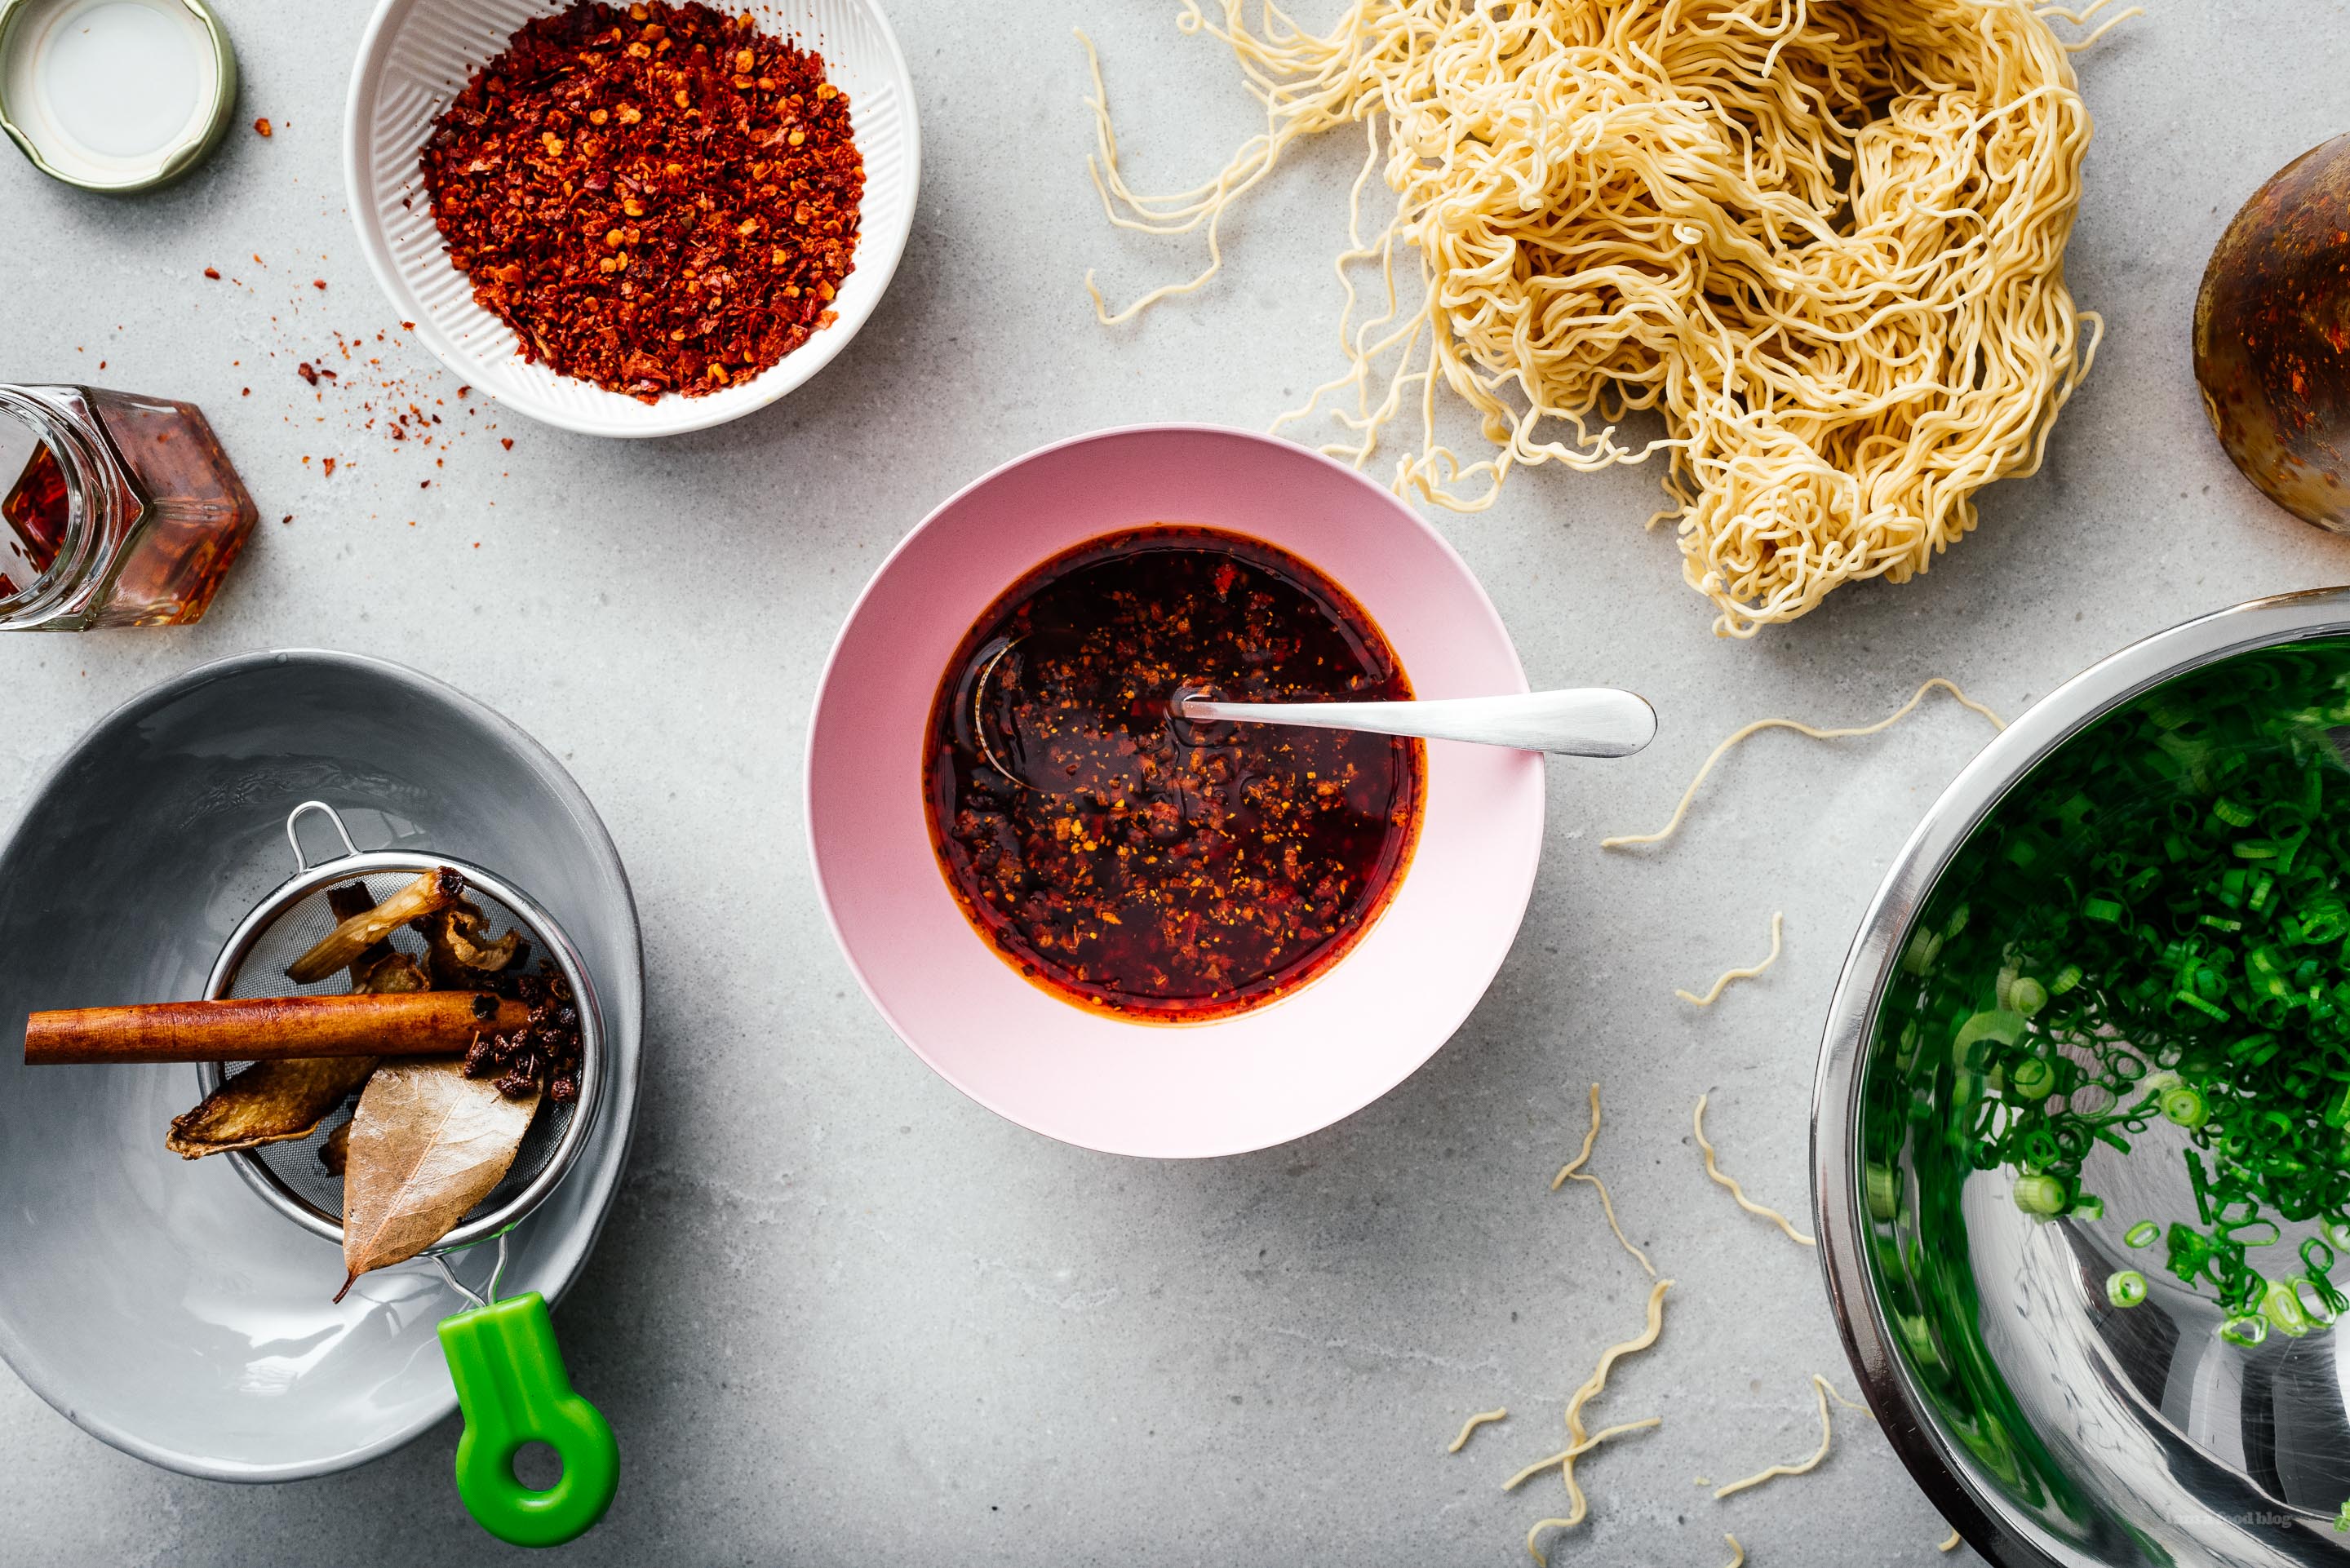 How To Make Authentic Chinese Spicy Hot Chili Oil I Am A Food Blog I Am A Food Blog